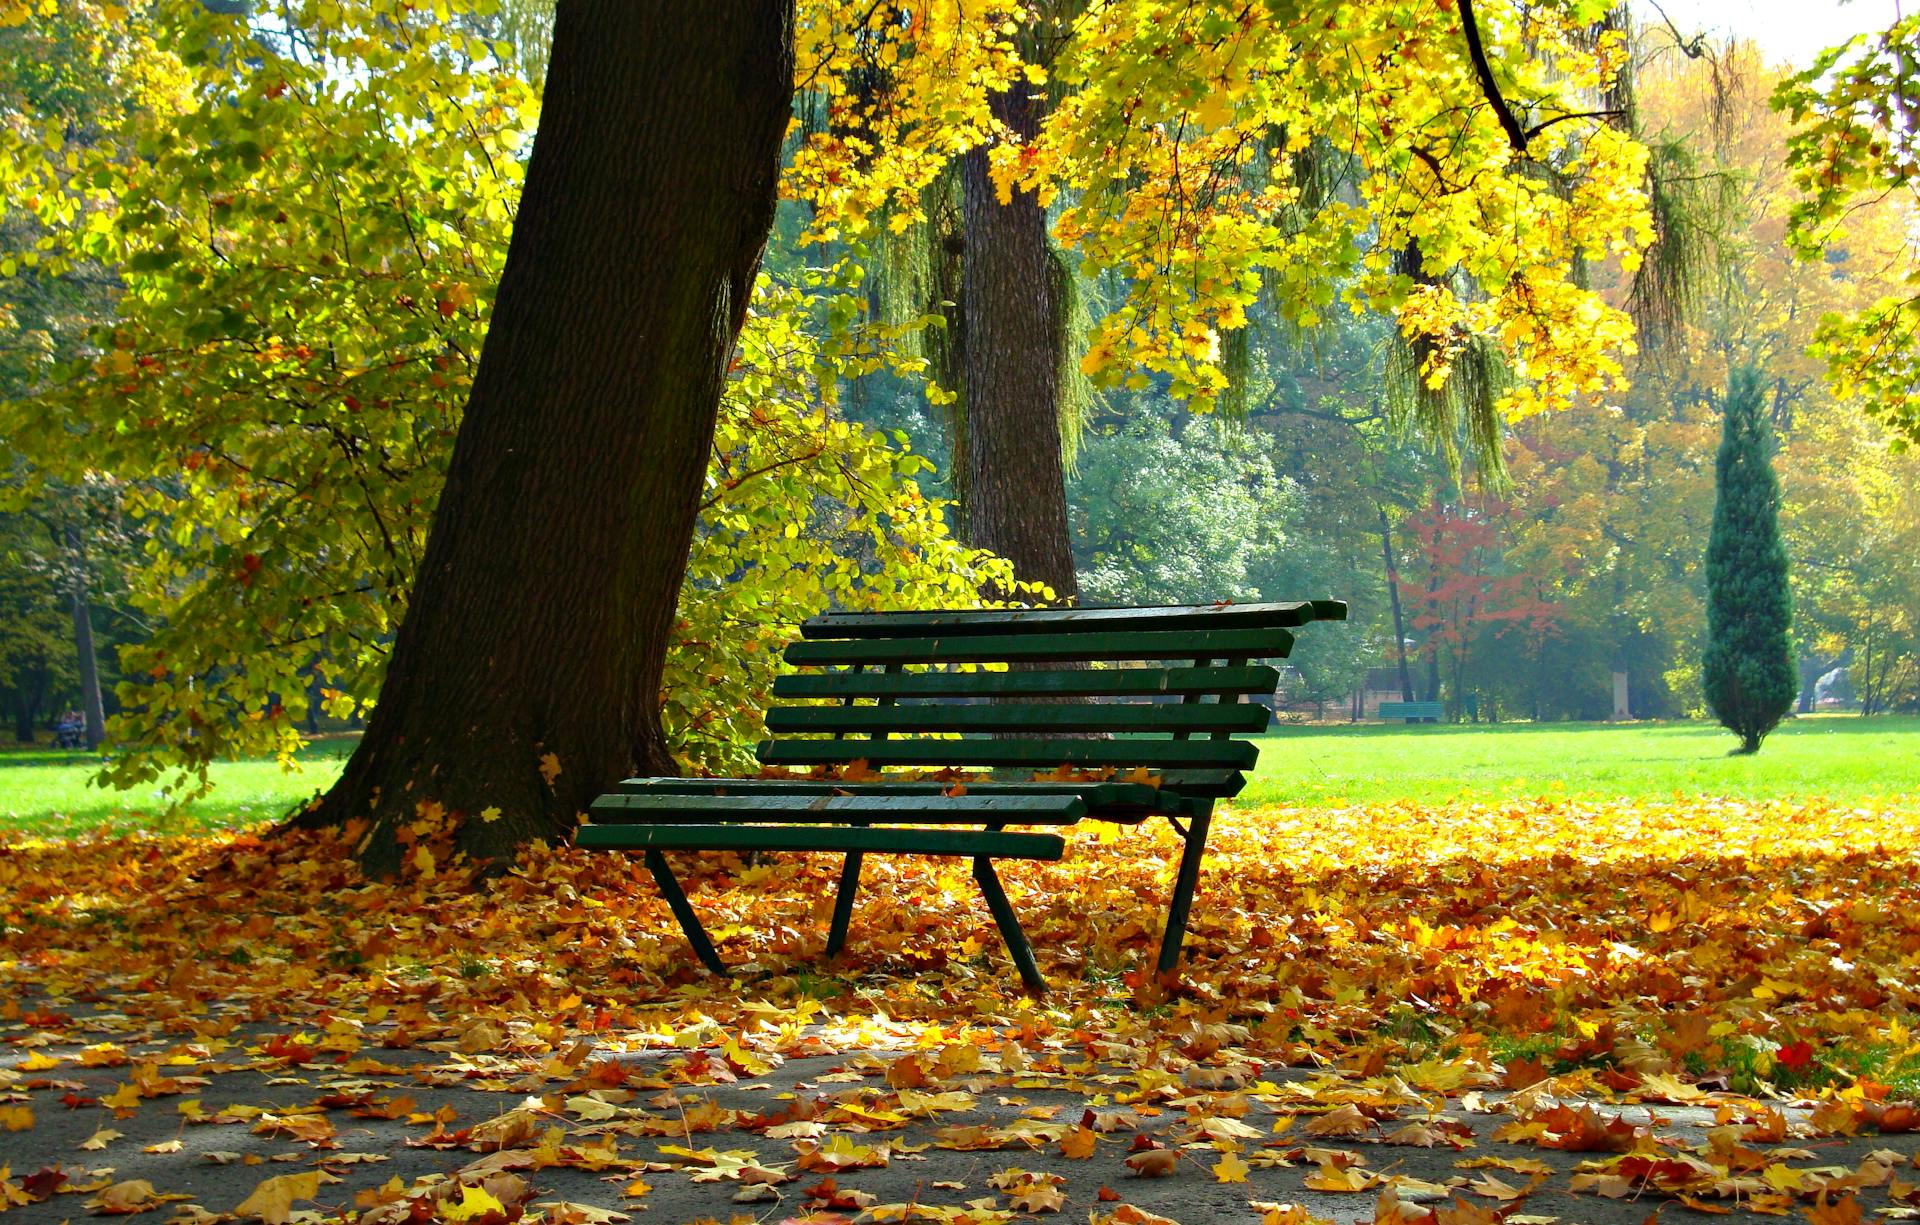 A secluded park bench | Source: Pexels